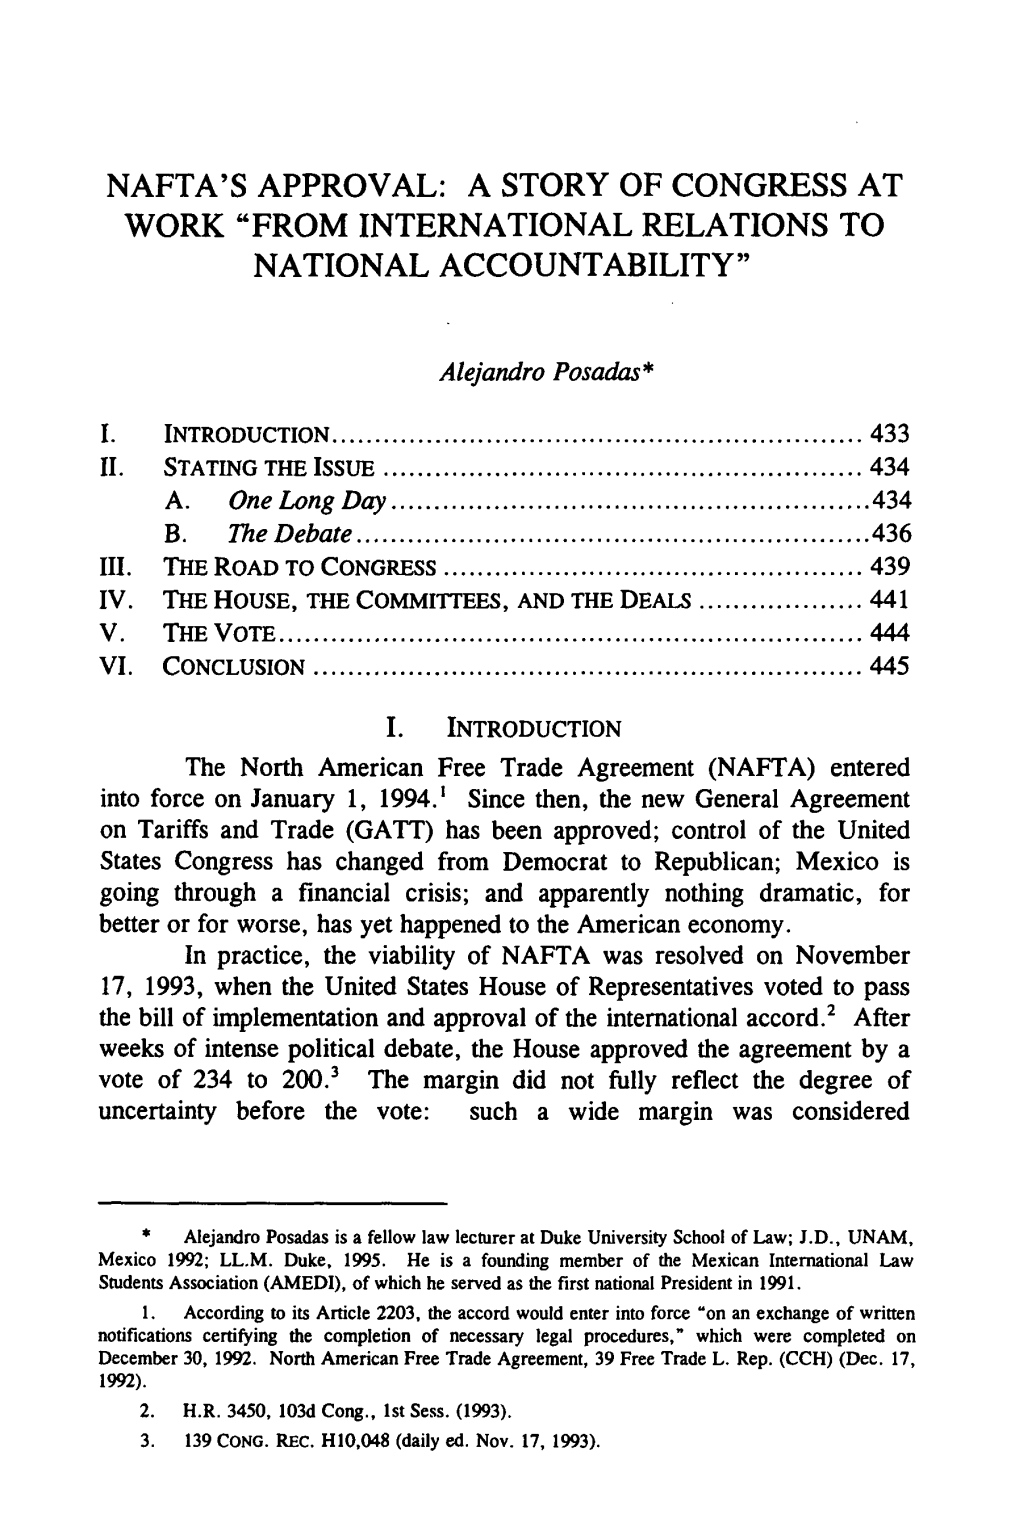 Nafta's Approval: a Story of Congress at Work "From International Relations to National Accountability"